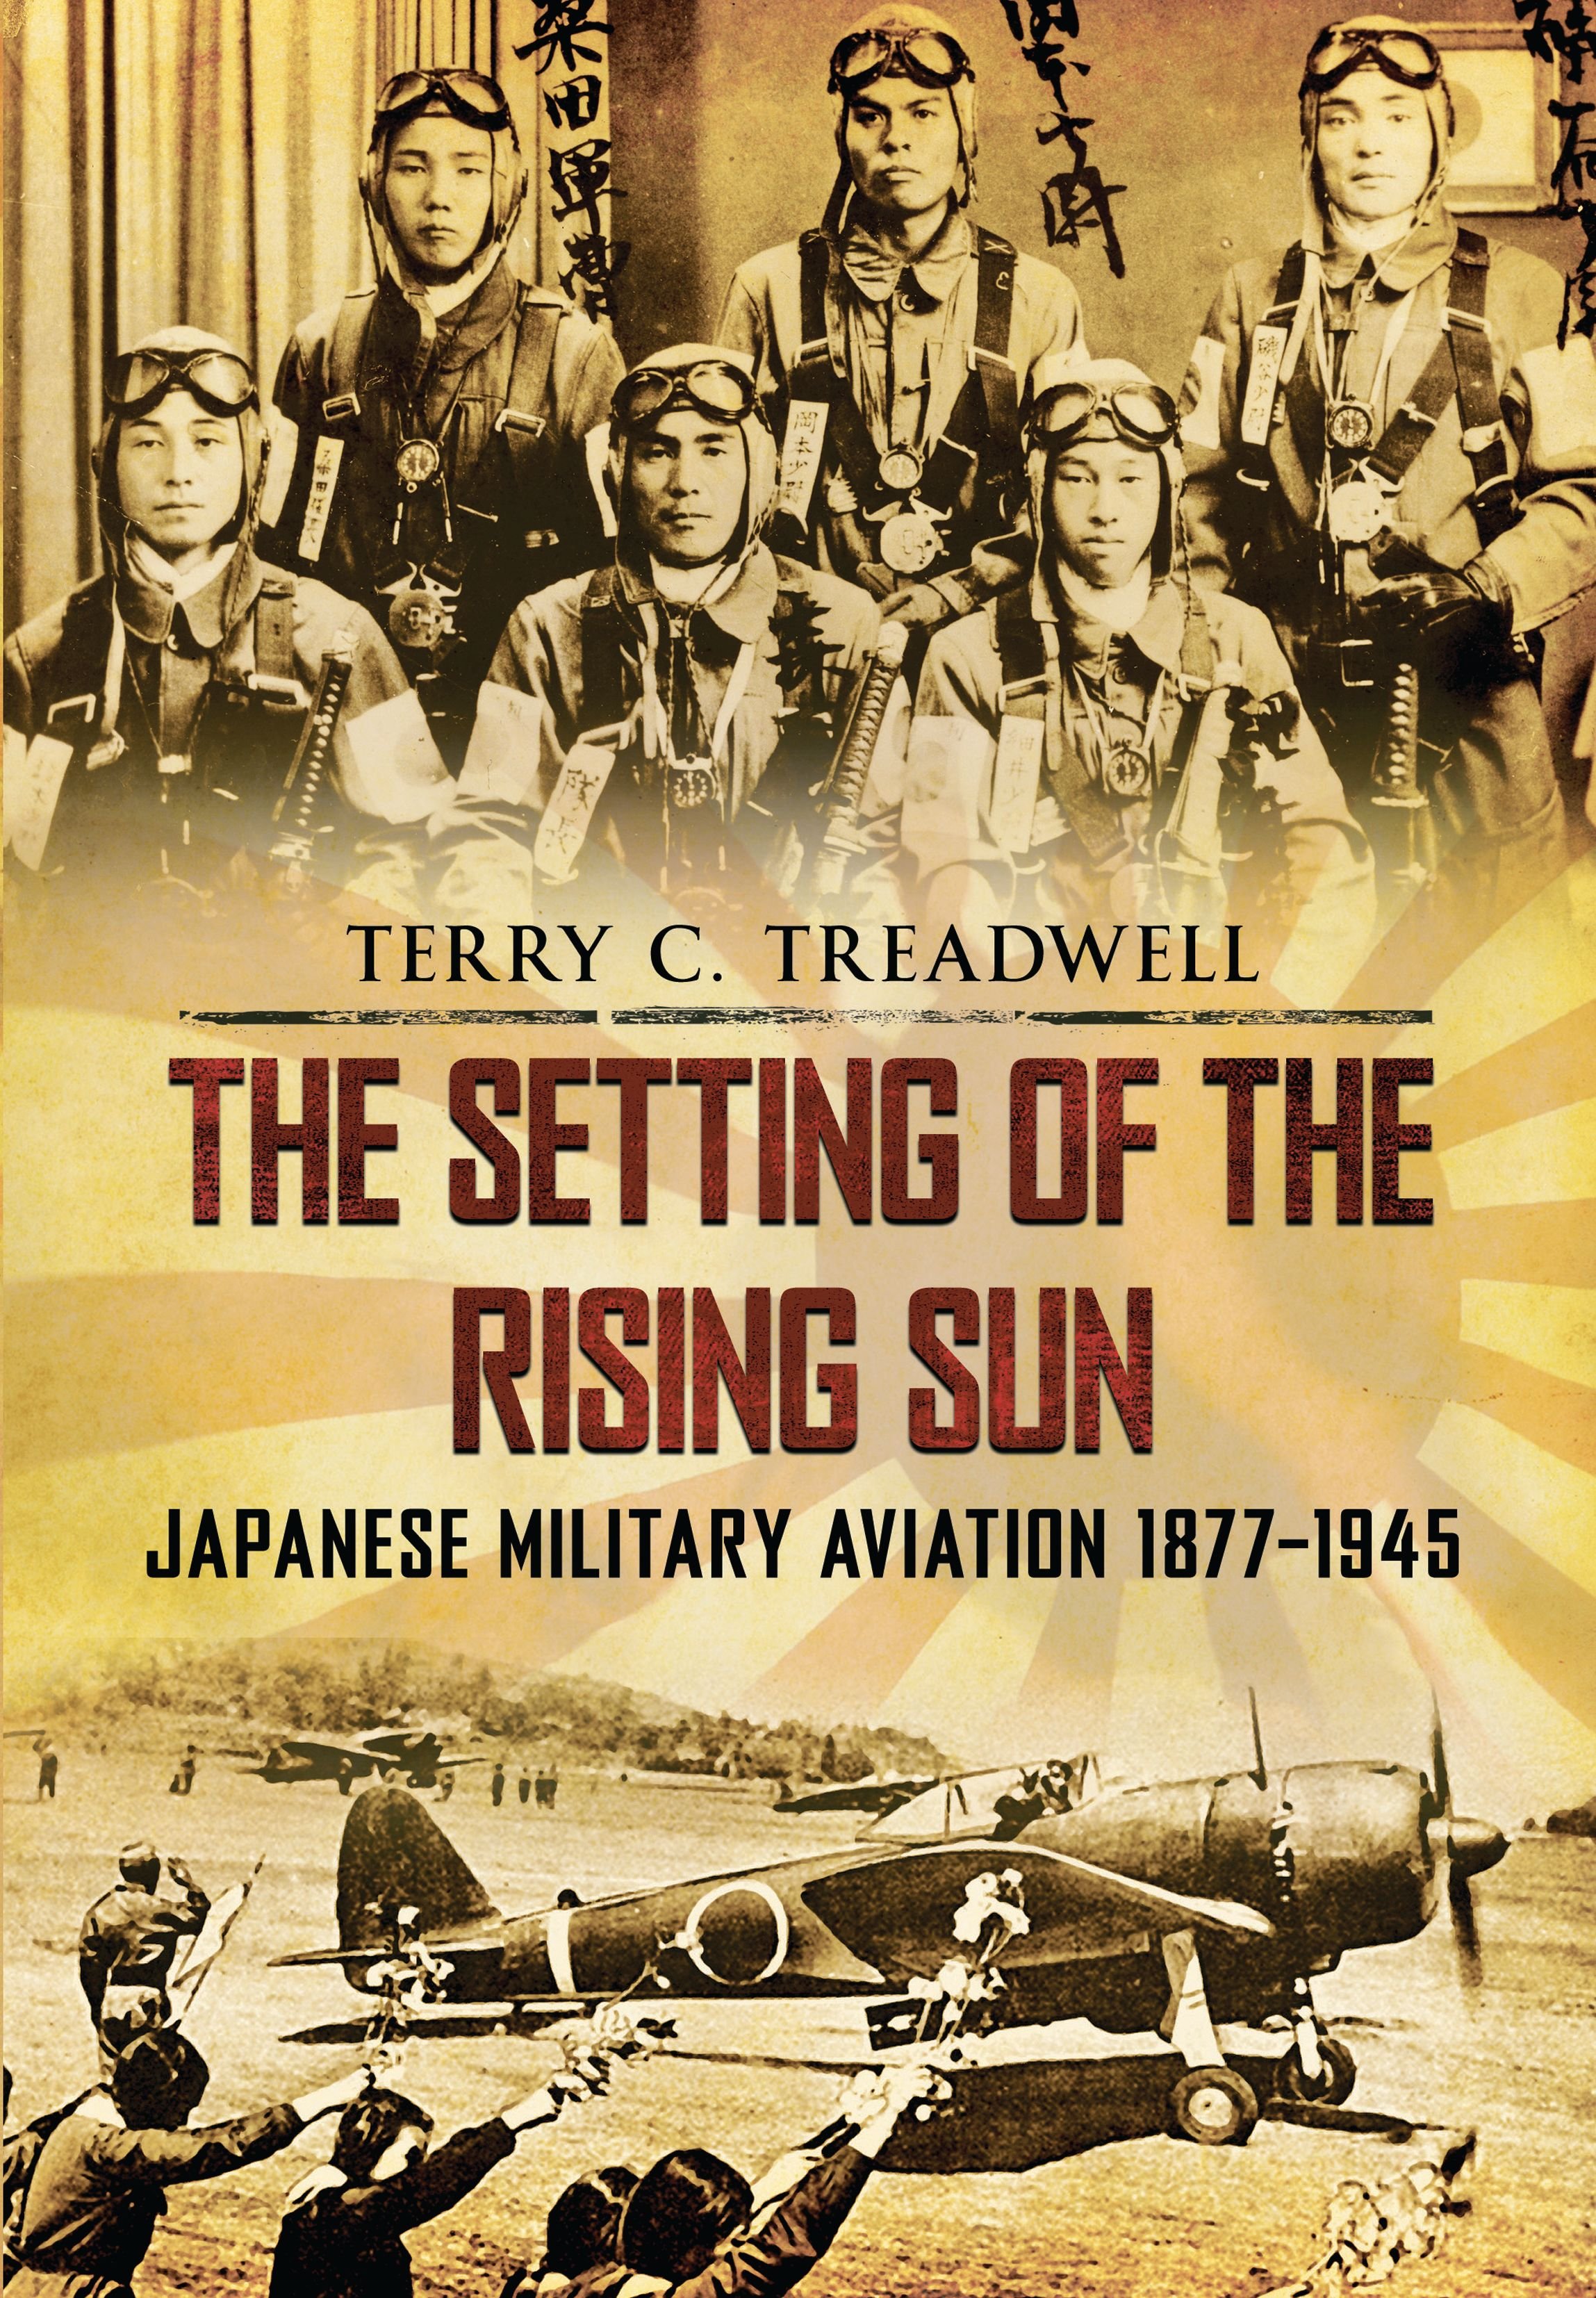 The Setting of the Rising Sun